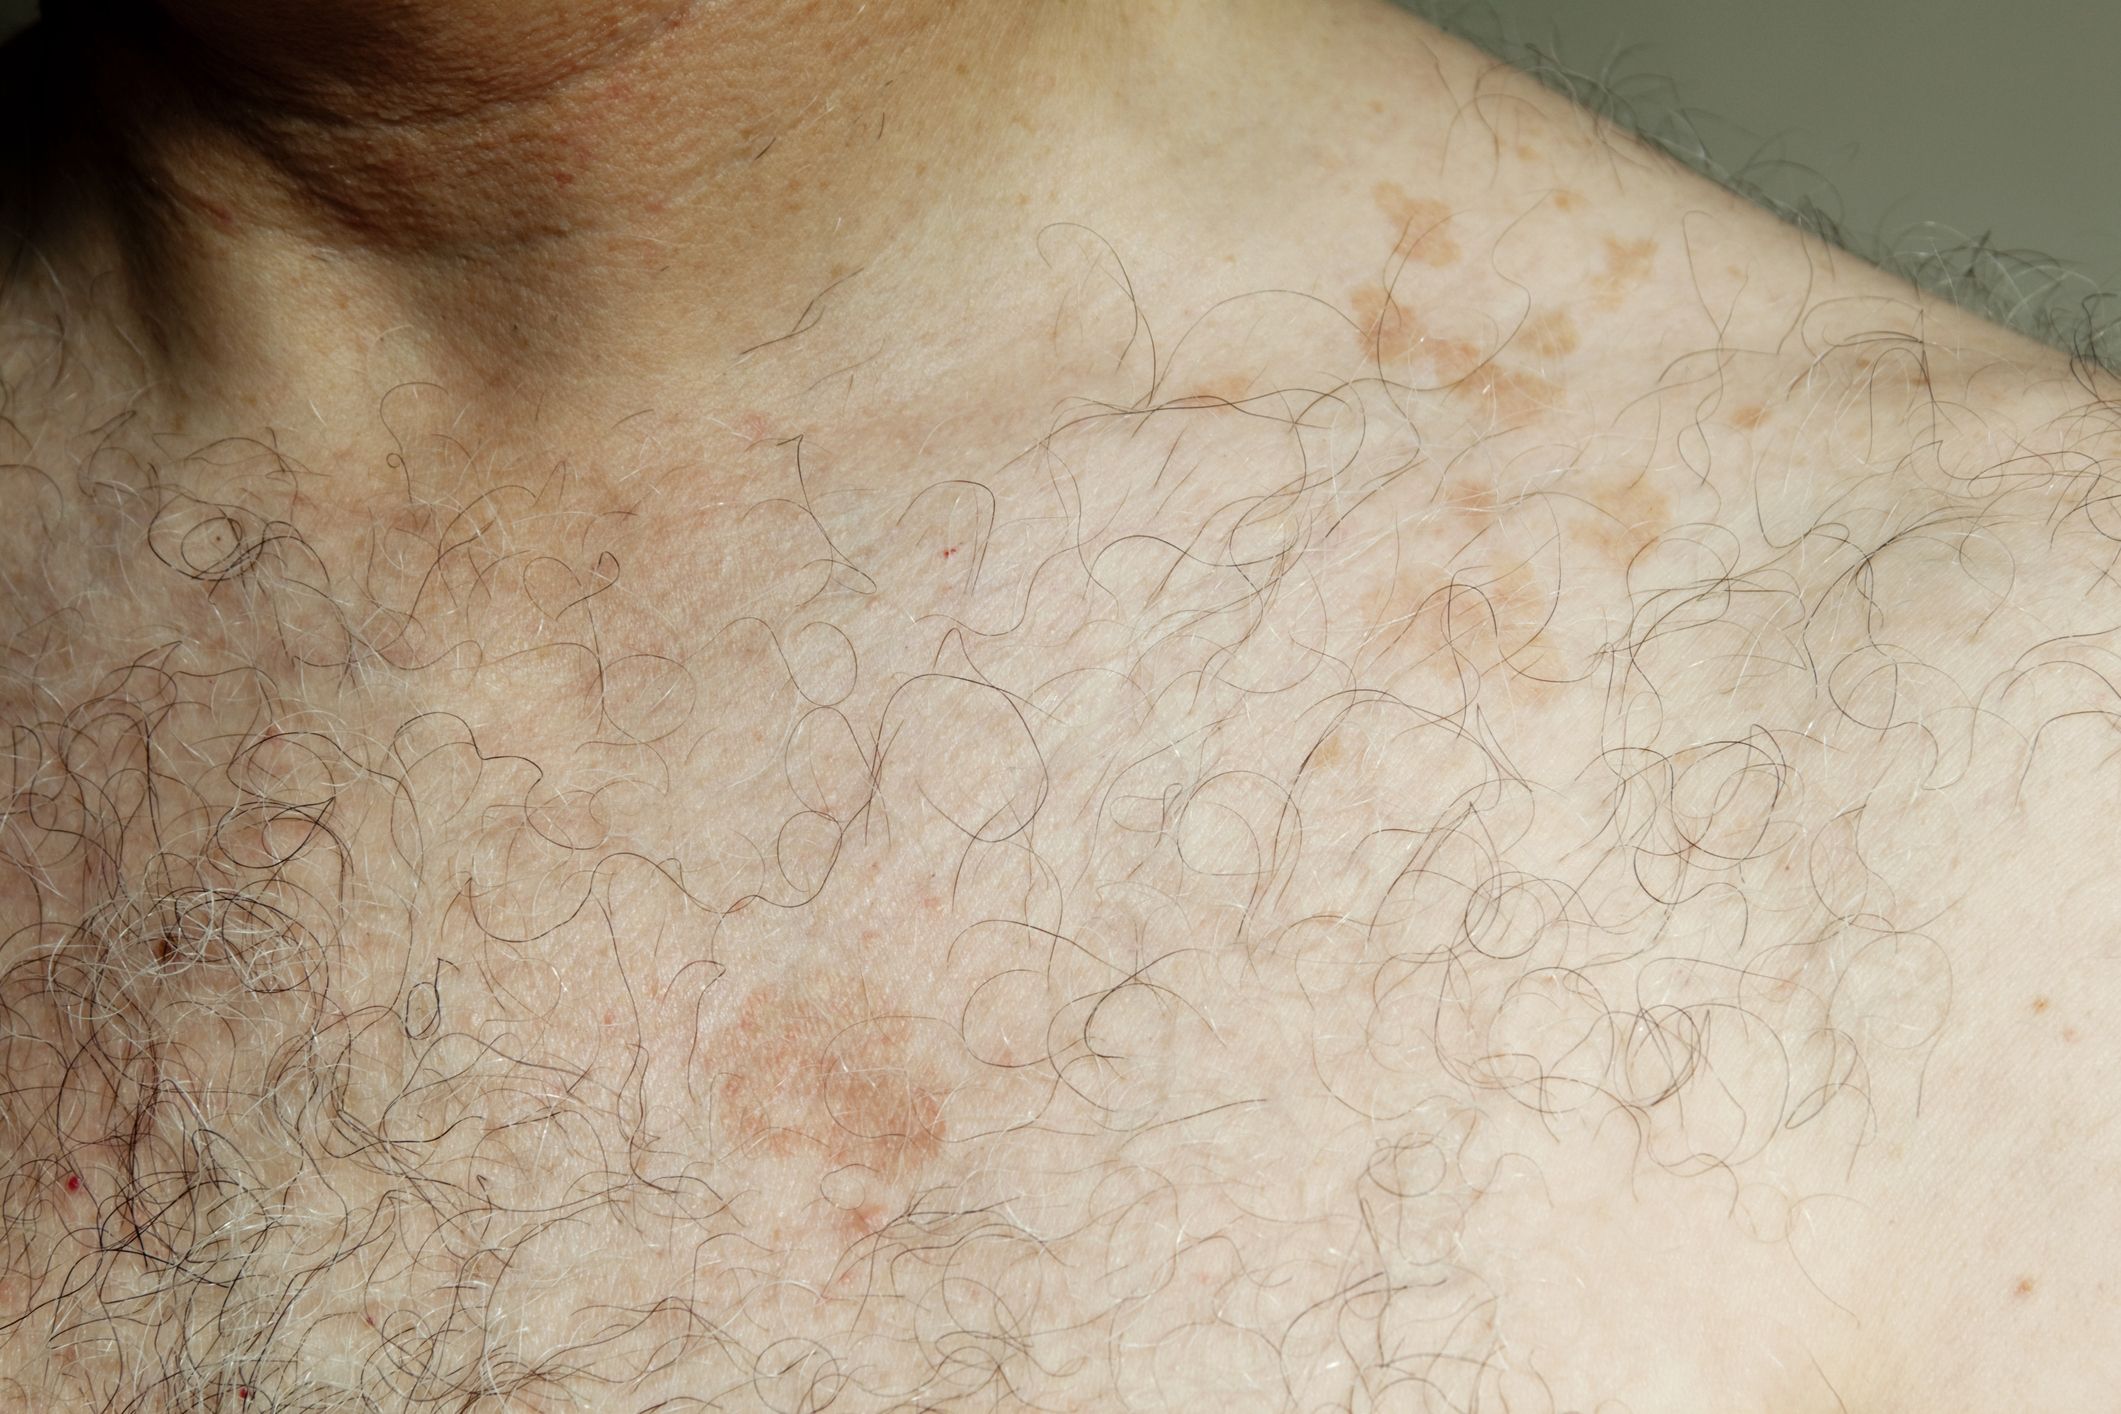 Skin Concerns] Have y'all ever seen tinea versicolor this bad before? I  have tried every anti-fungal cream, anti-fungal pill course (prescribed by  a doctor), selsun blue. It goes away, then literally just